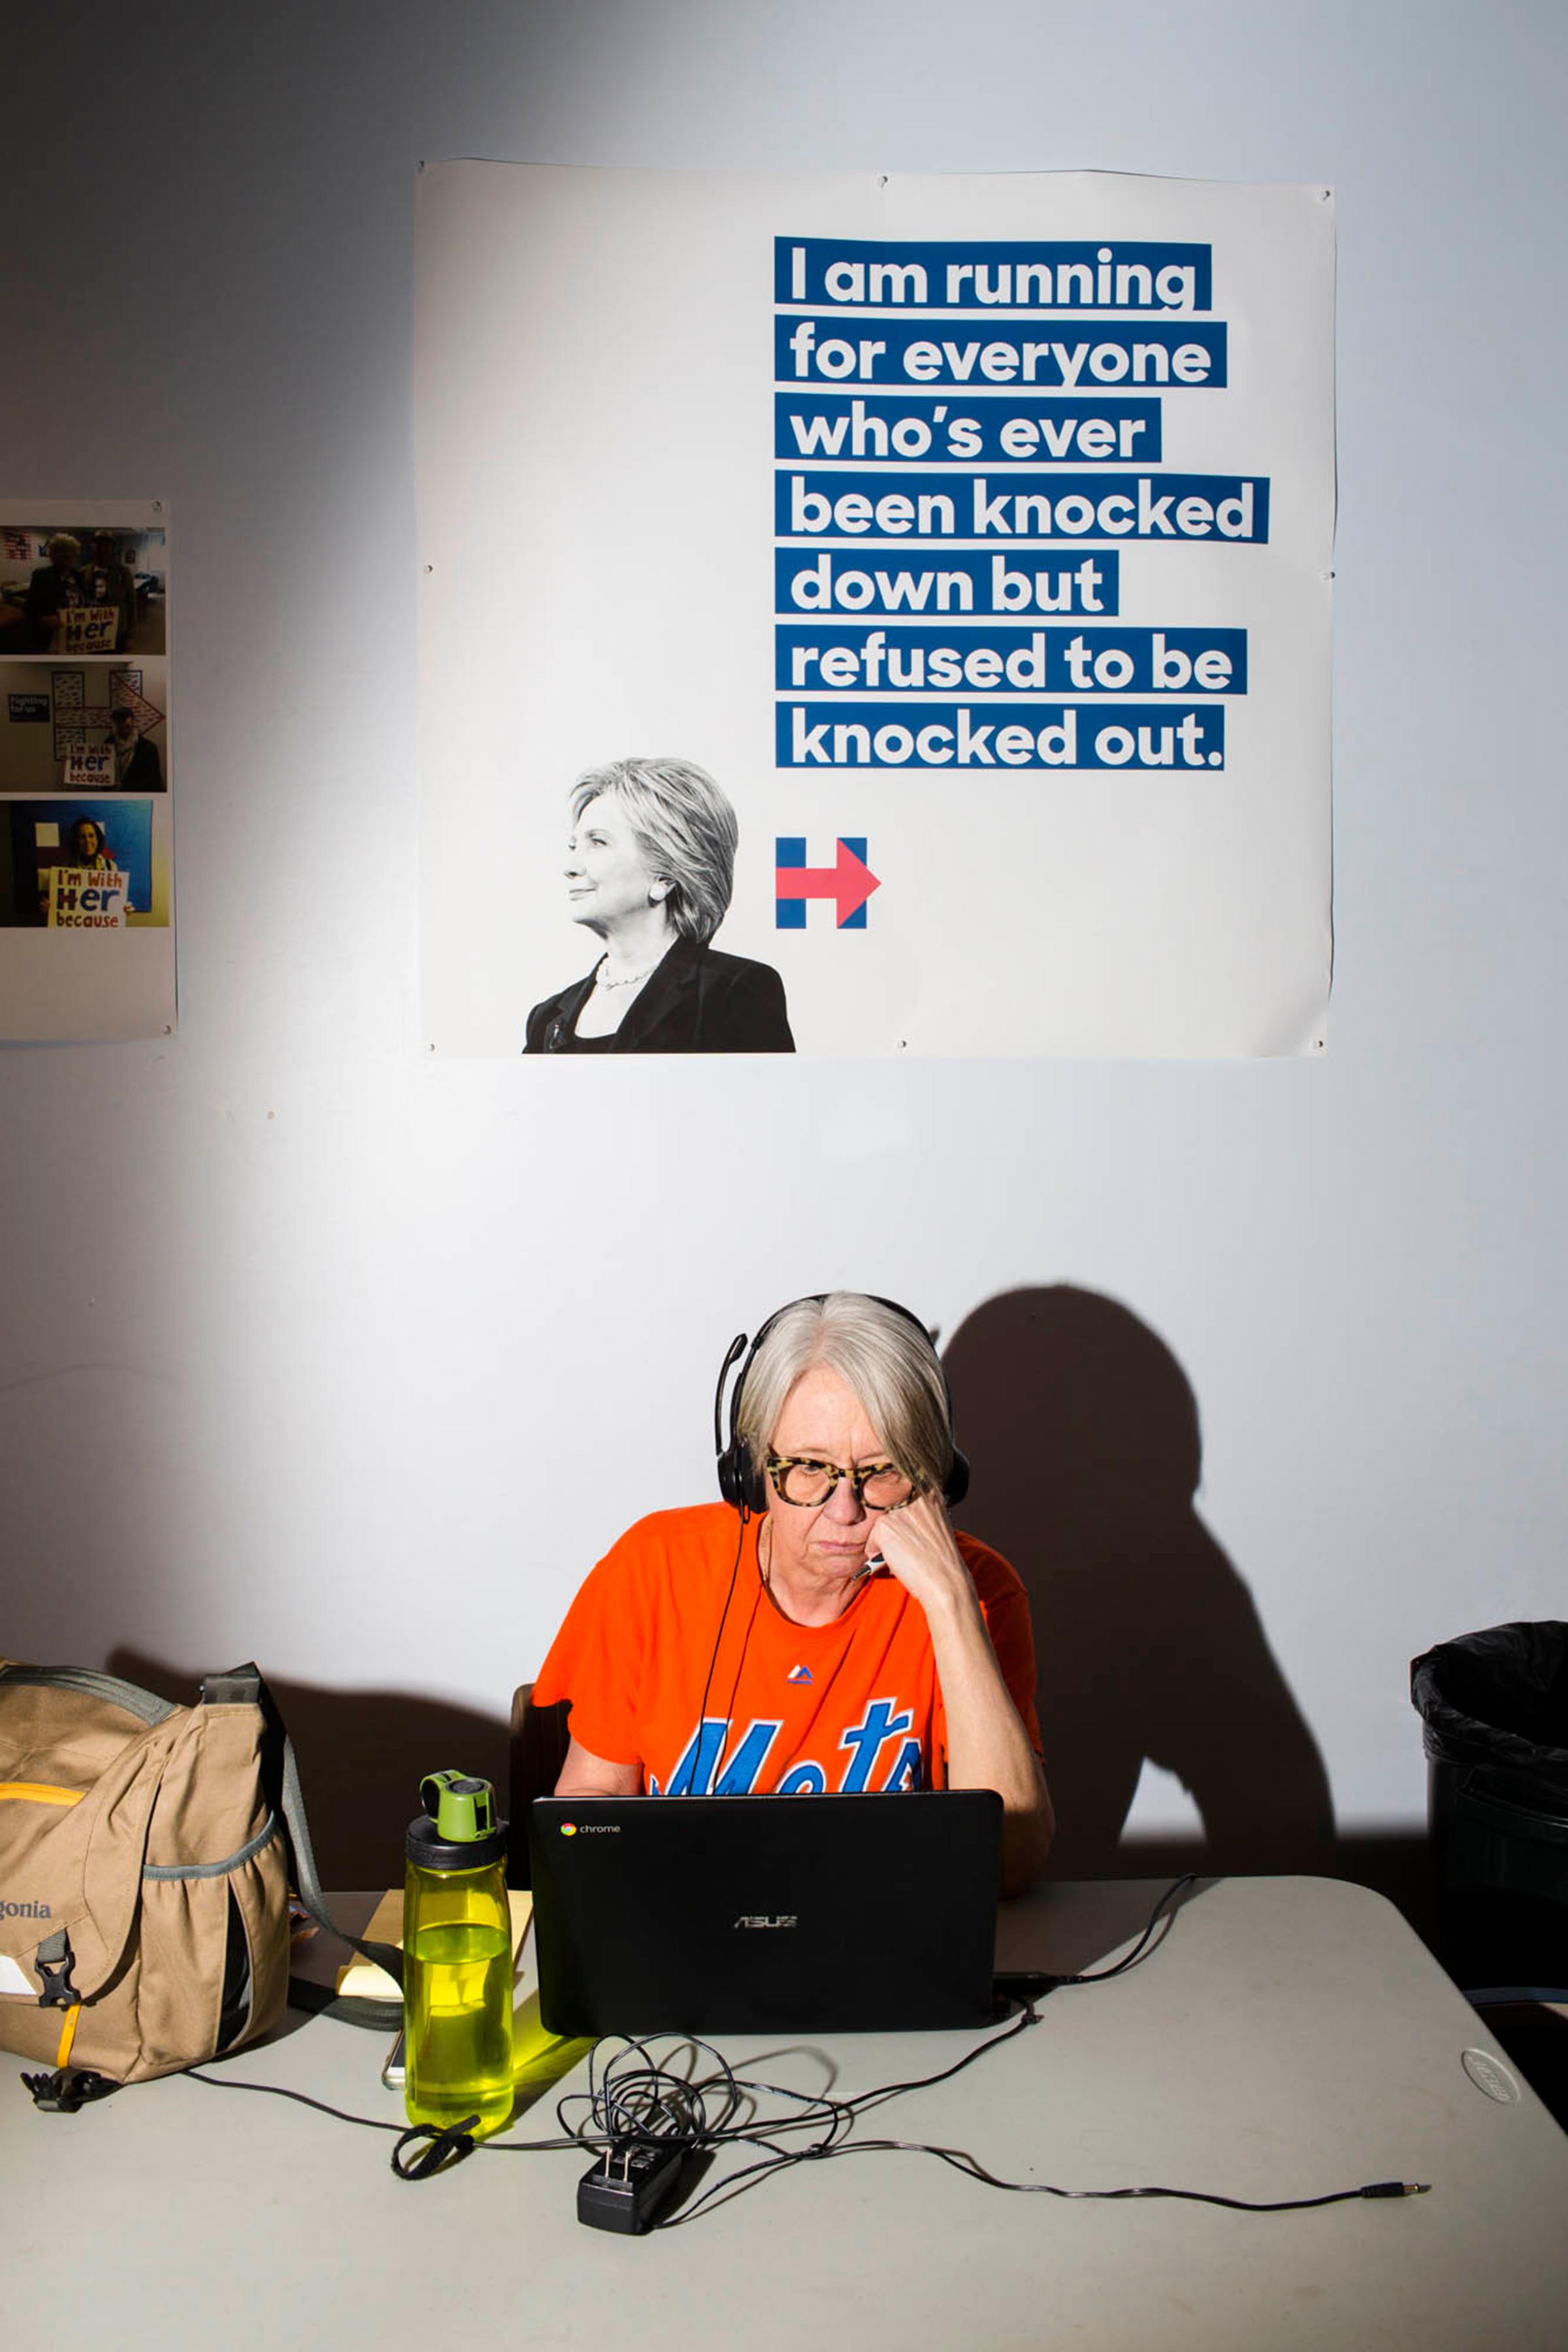 NEW YORK - MAY 24: Scenes from Inside the campaign headquarters of Hillary Clinton on May 24, 2016, in Brooklyn, NY. (Photo by Landon Nordeman)